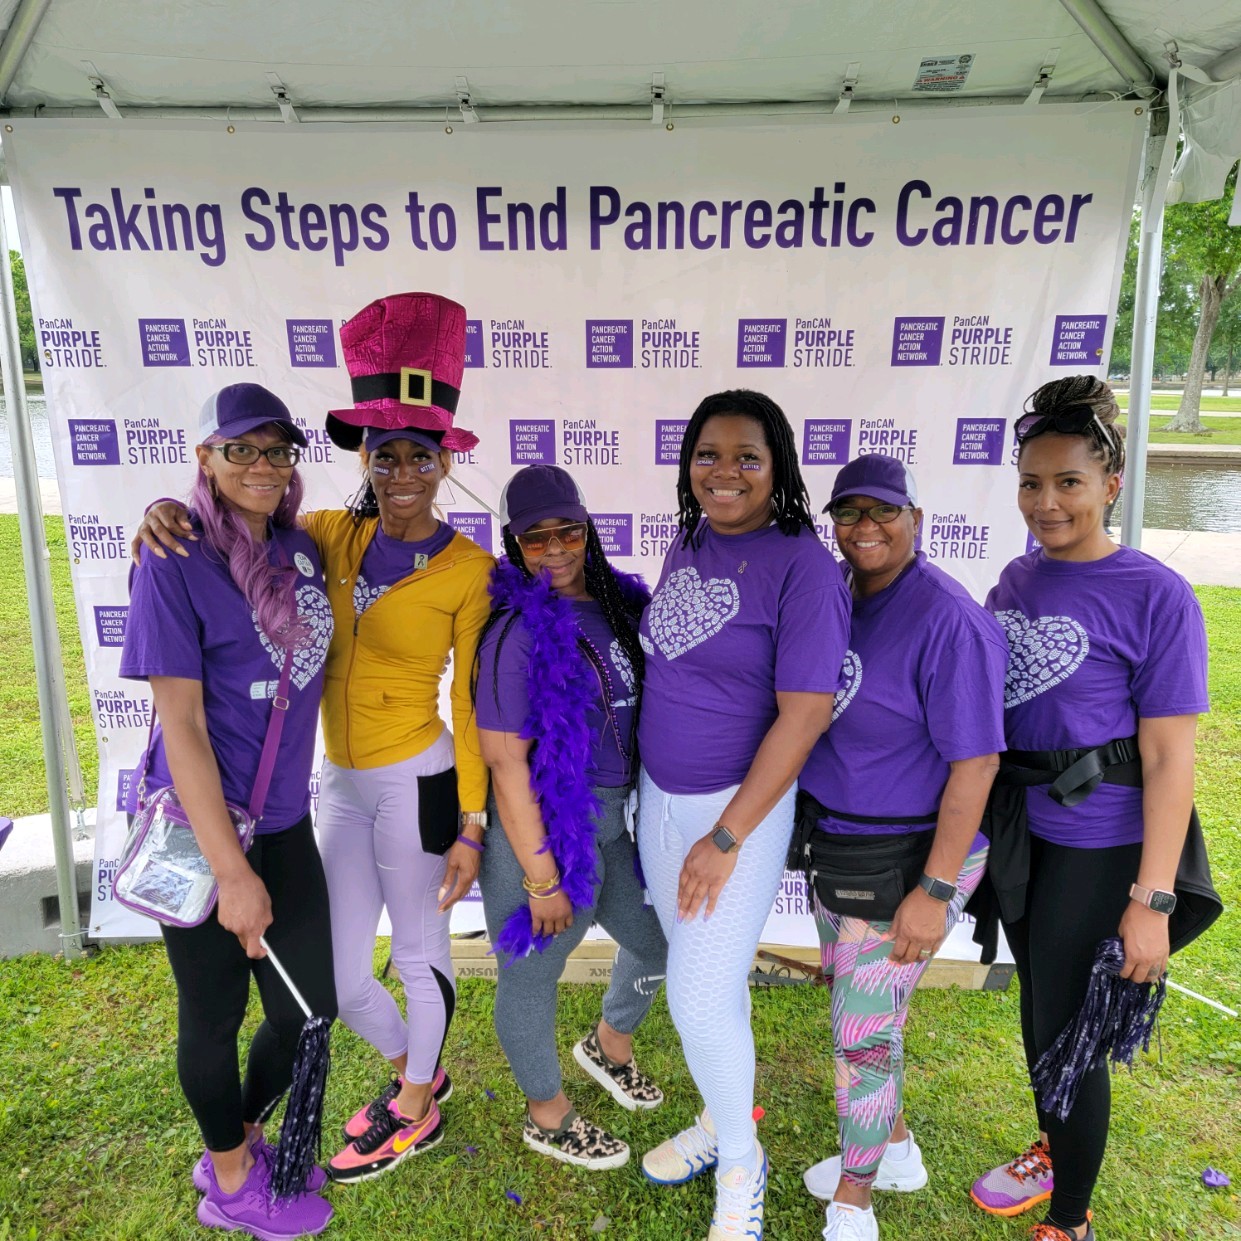 Louisiana woman who lost mother to pancreatic cancer helps raise awareness [Video]